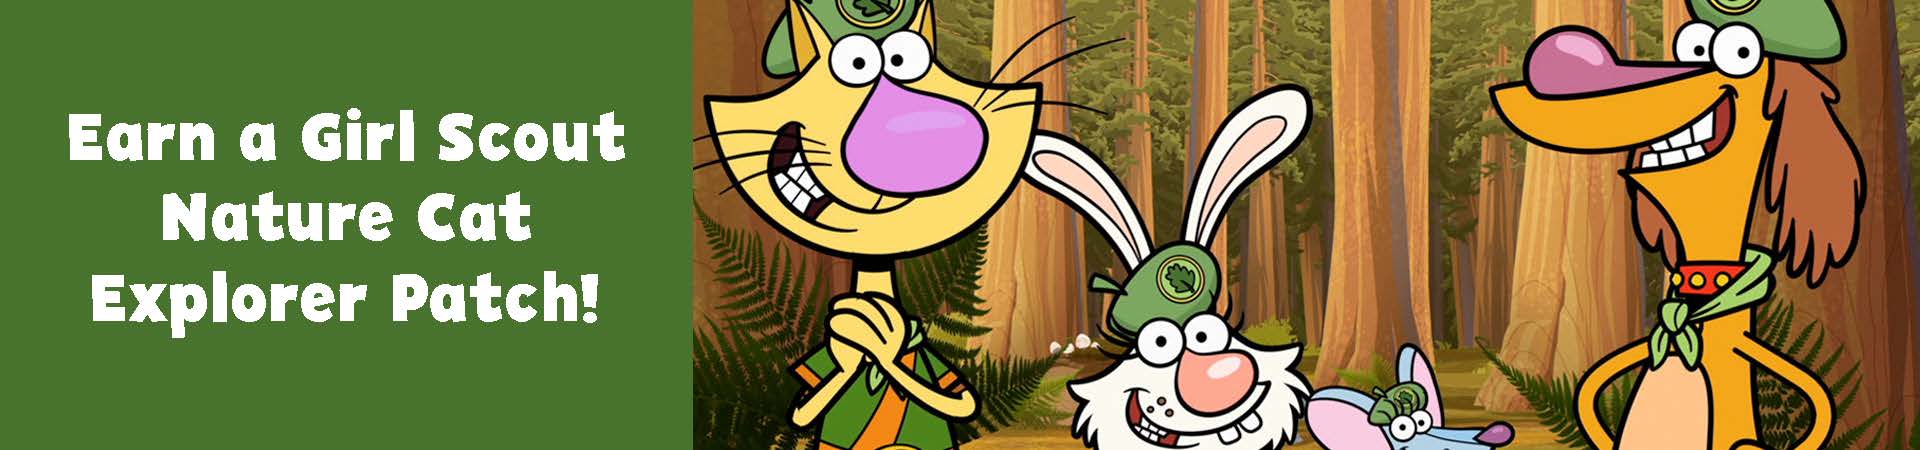  a graphic with Nature Cat and friends with text that says "Earn a Girl Scout Nature Cat Explorer Patch!" 